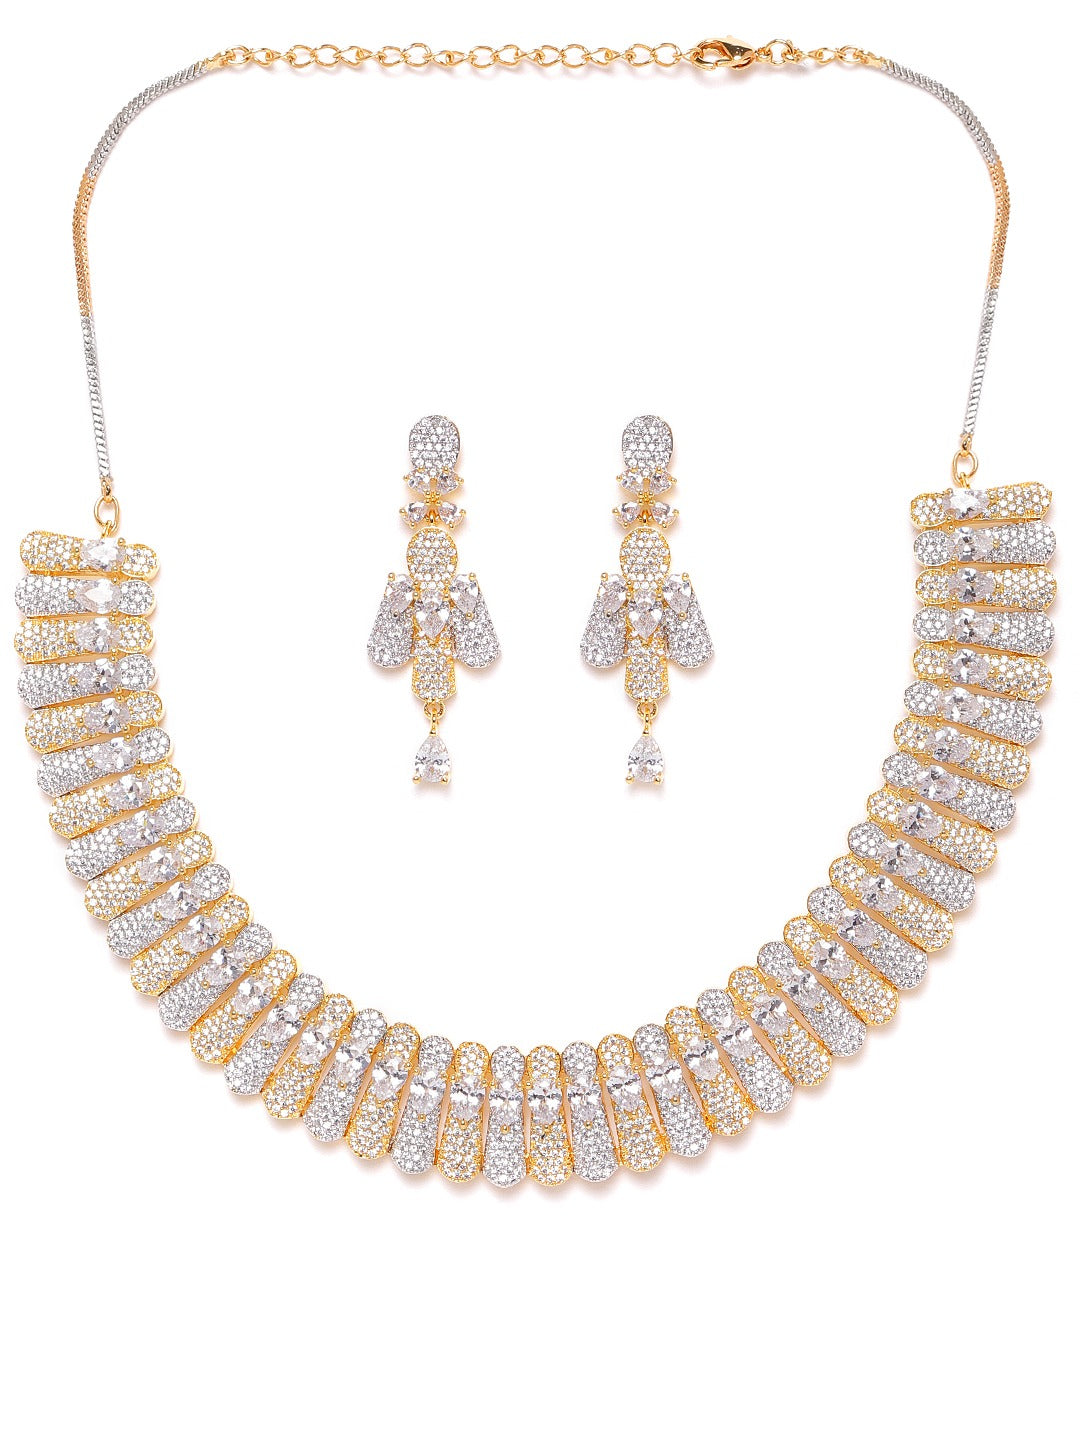 Silver-Toned Gold-Plated AD-Studded Handcrafted Jewellery Set